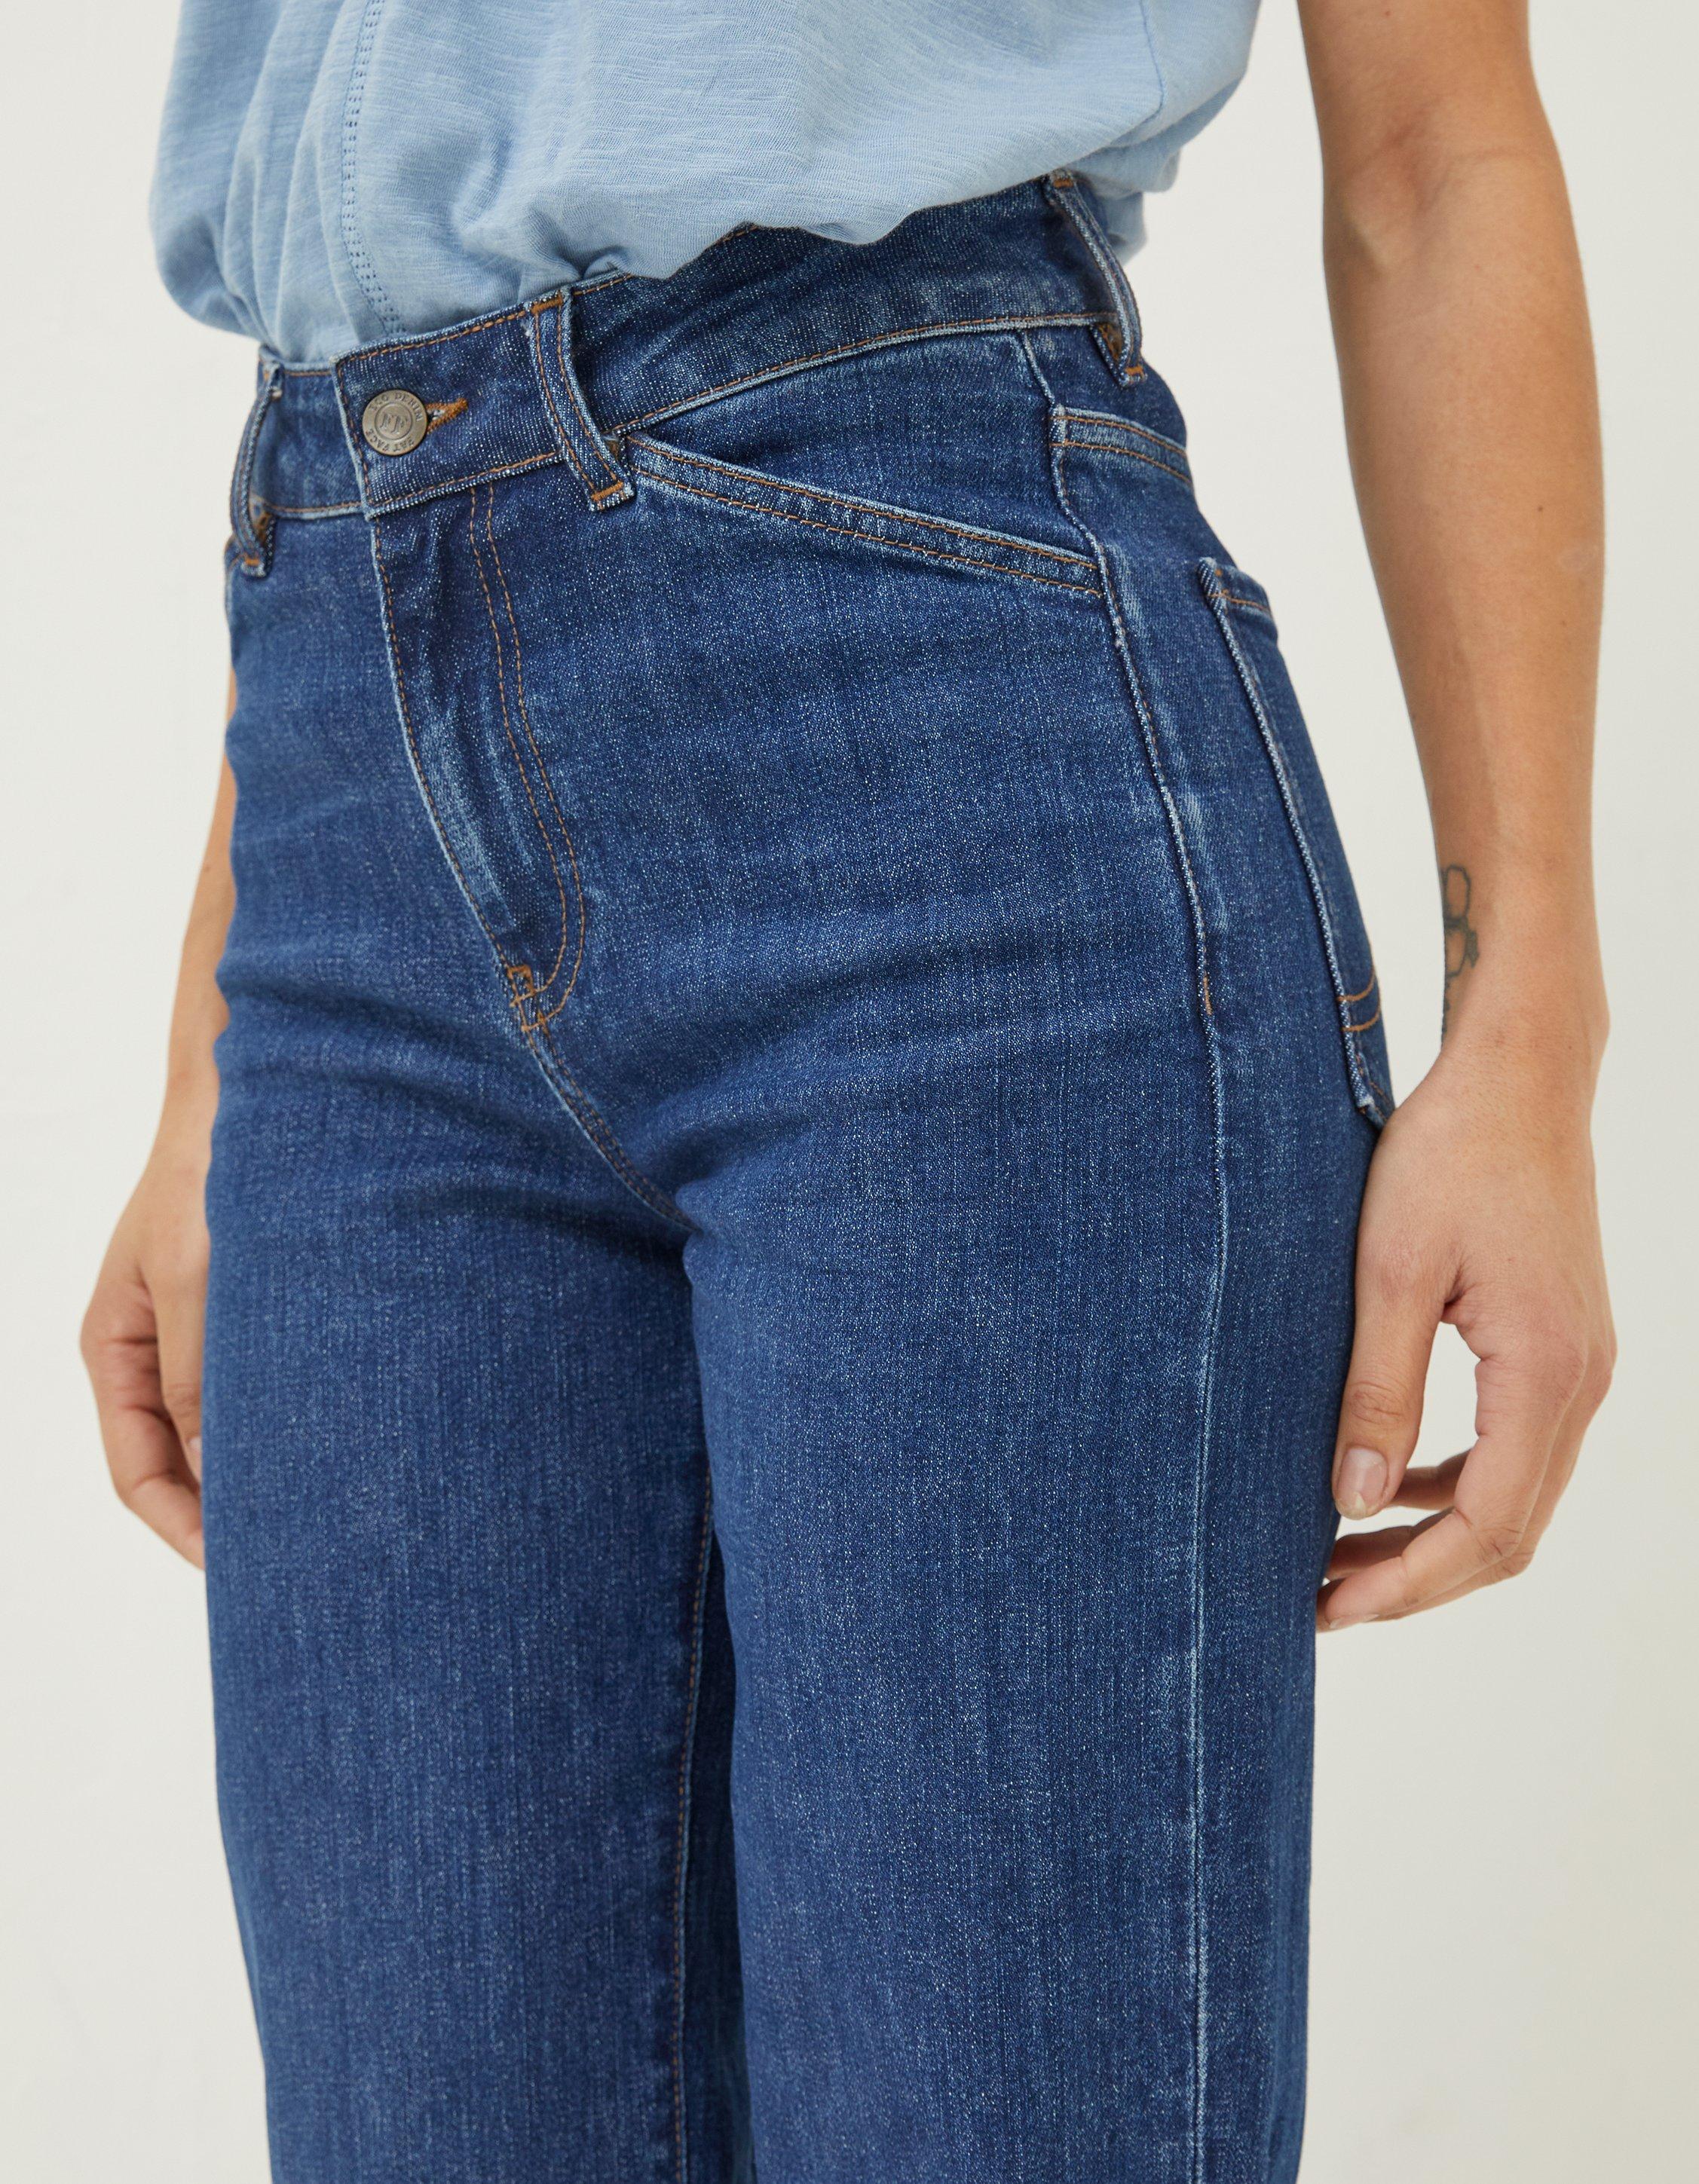 I Tried 10 Pairs Of Wide-Leg Jeans: What I Loved (& Didn't) - The